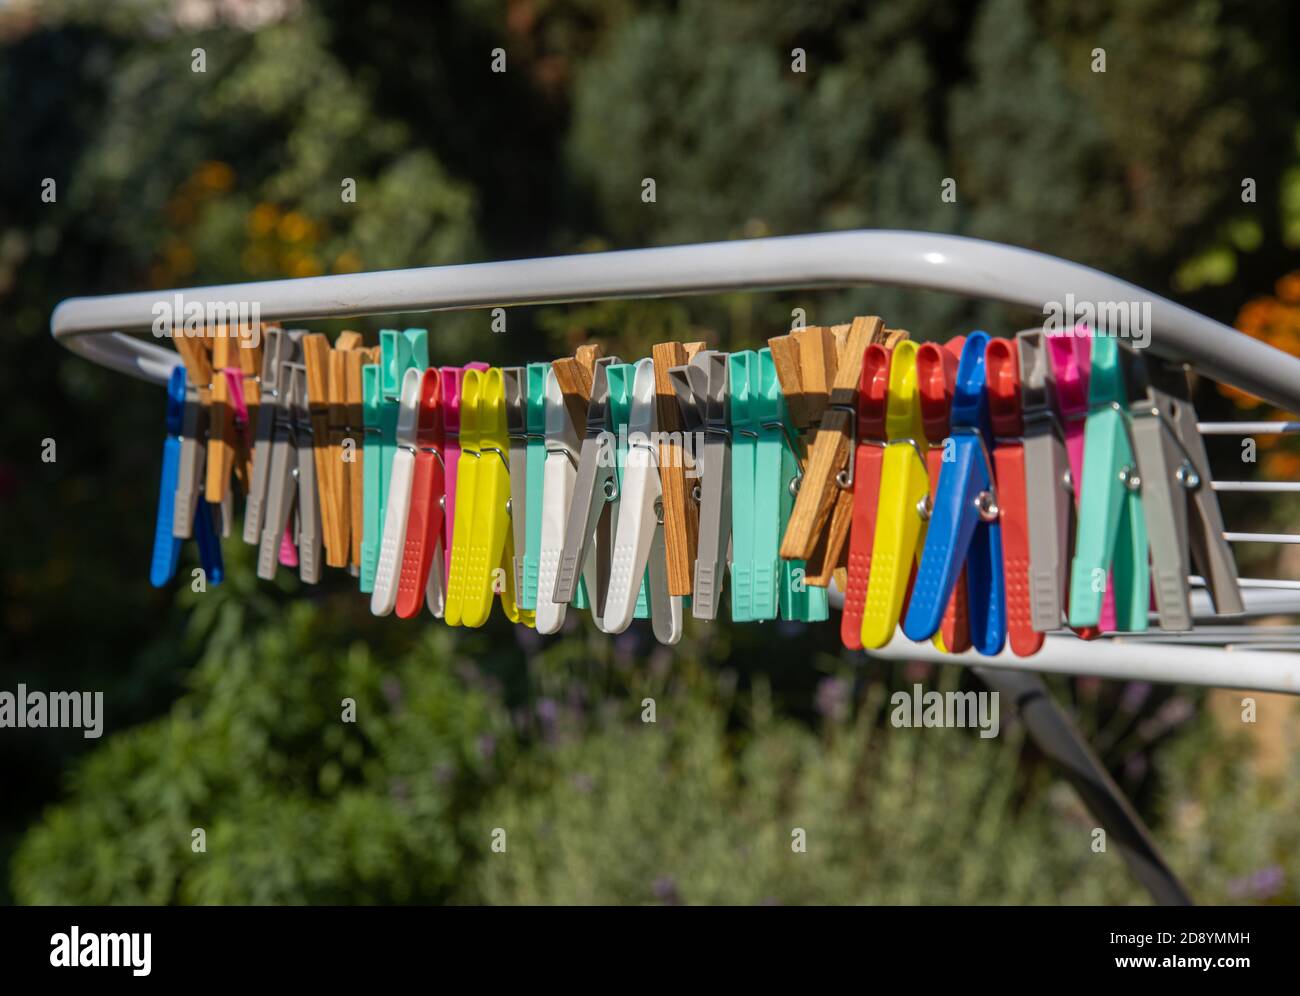 A colored clothes pegs hanging on a drying rack wire. A group of